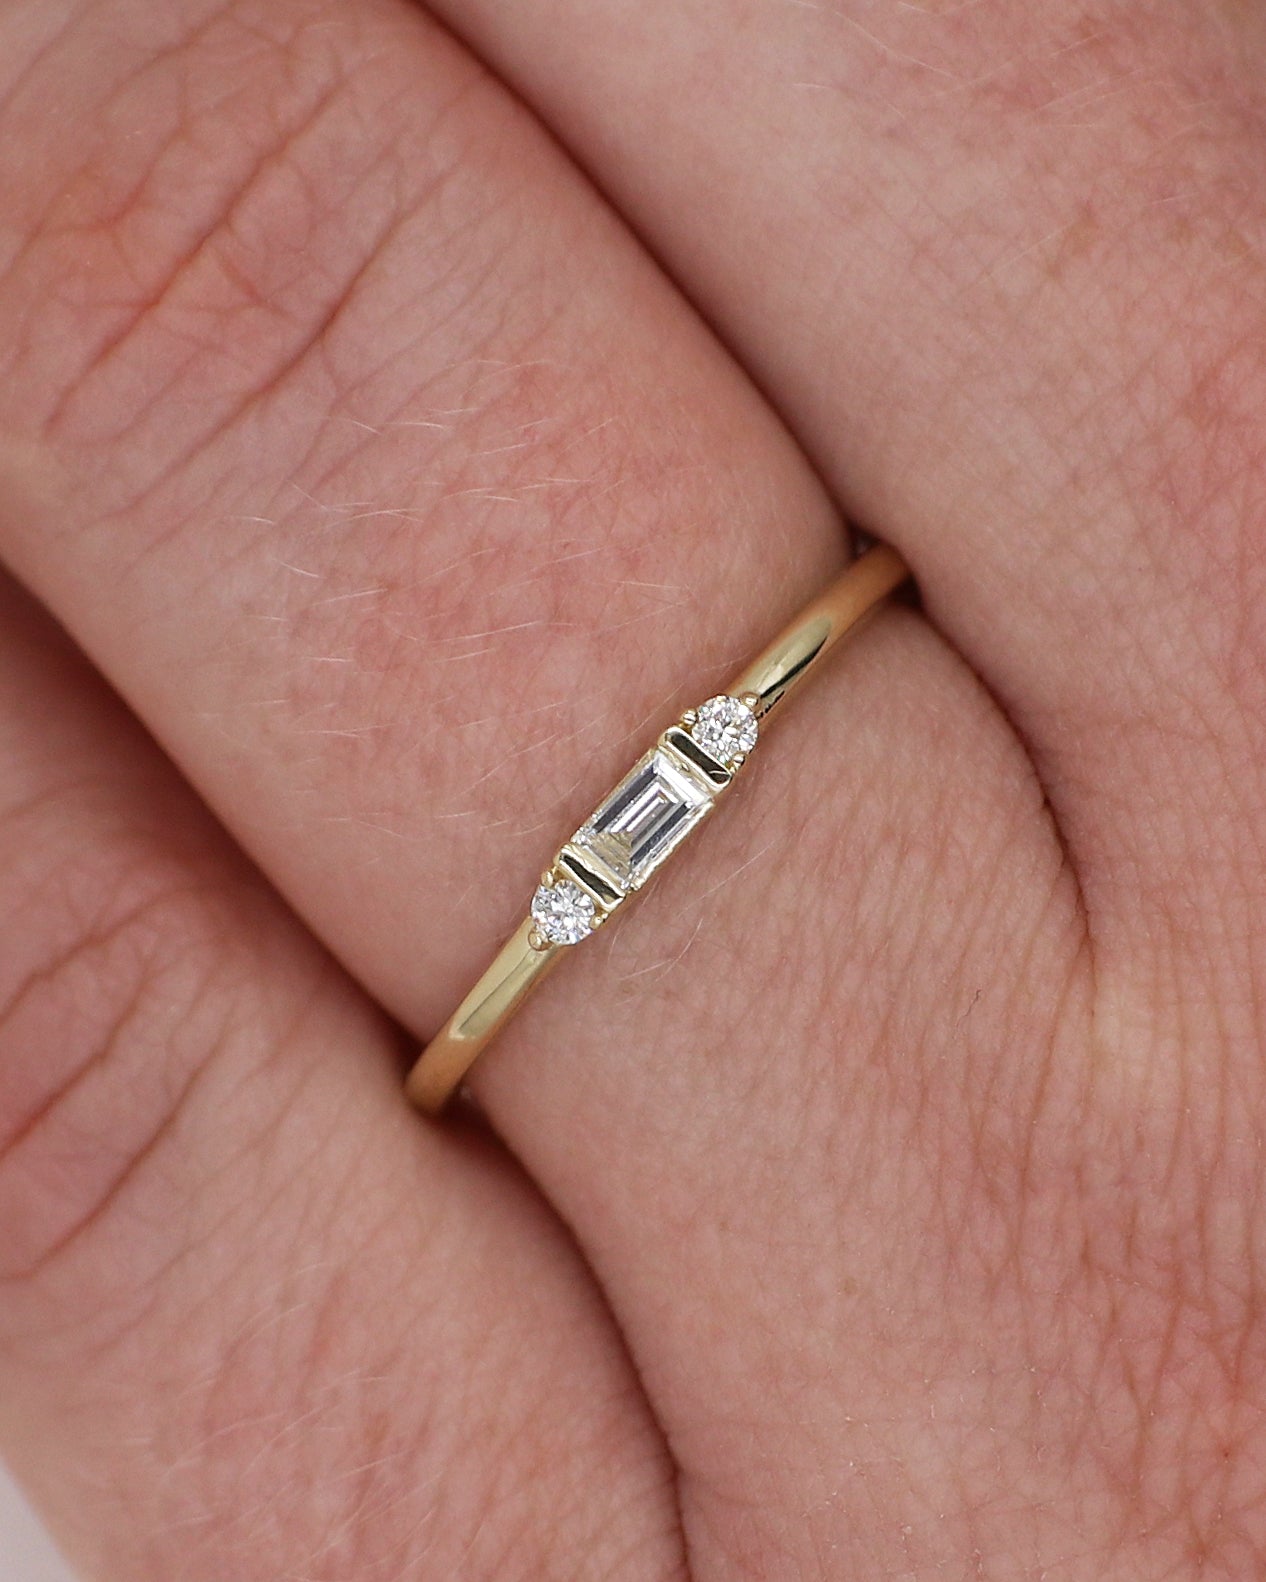 Load image into Gallery viewer, Diamond Stackable Ring
